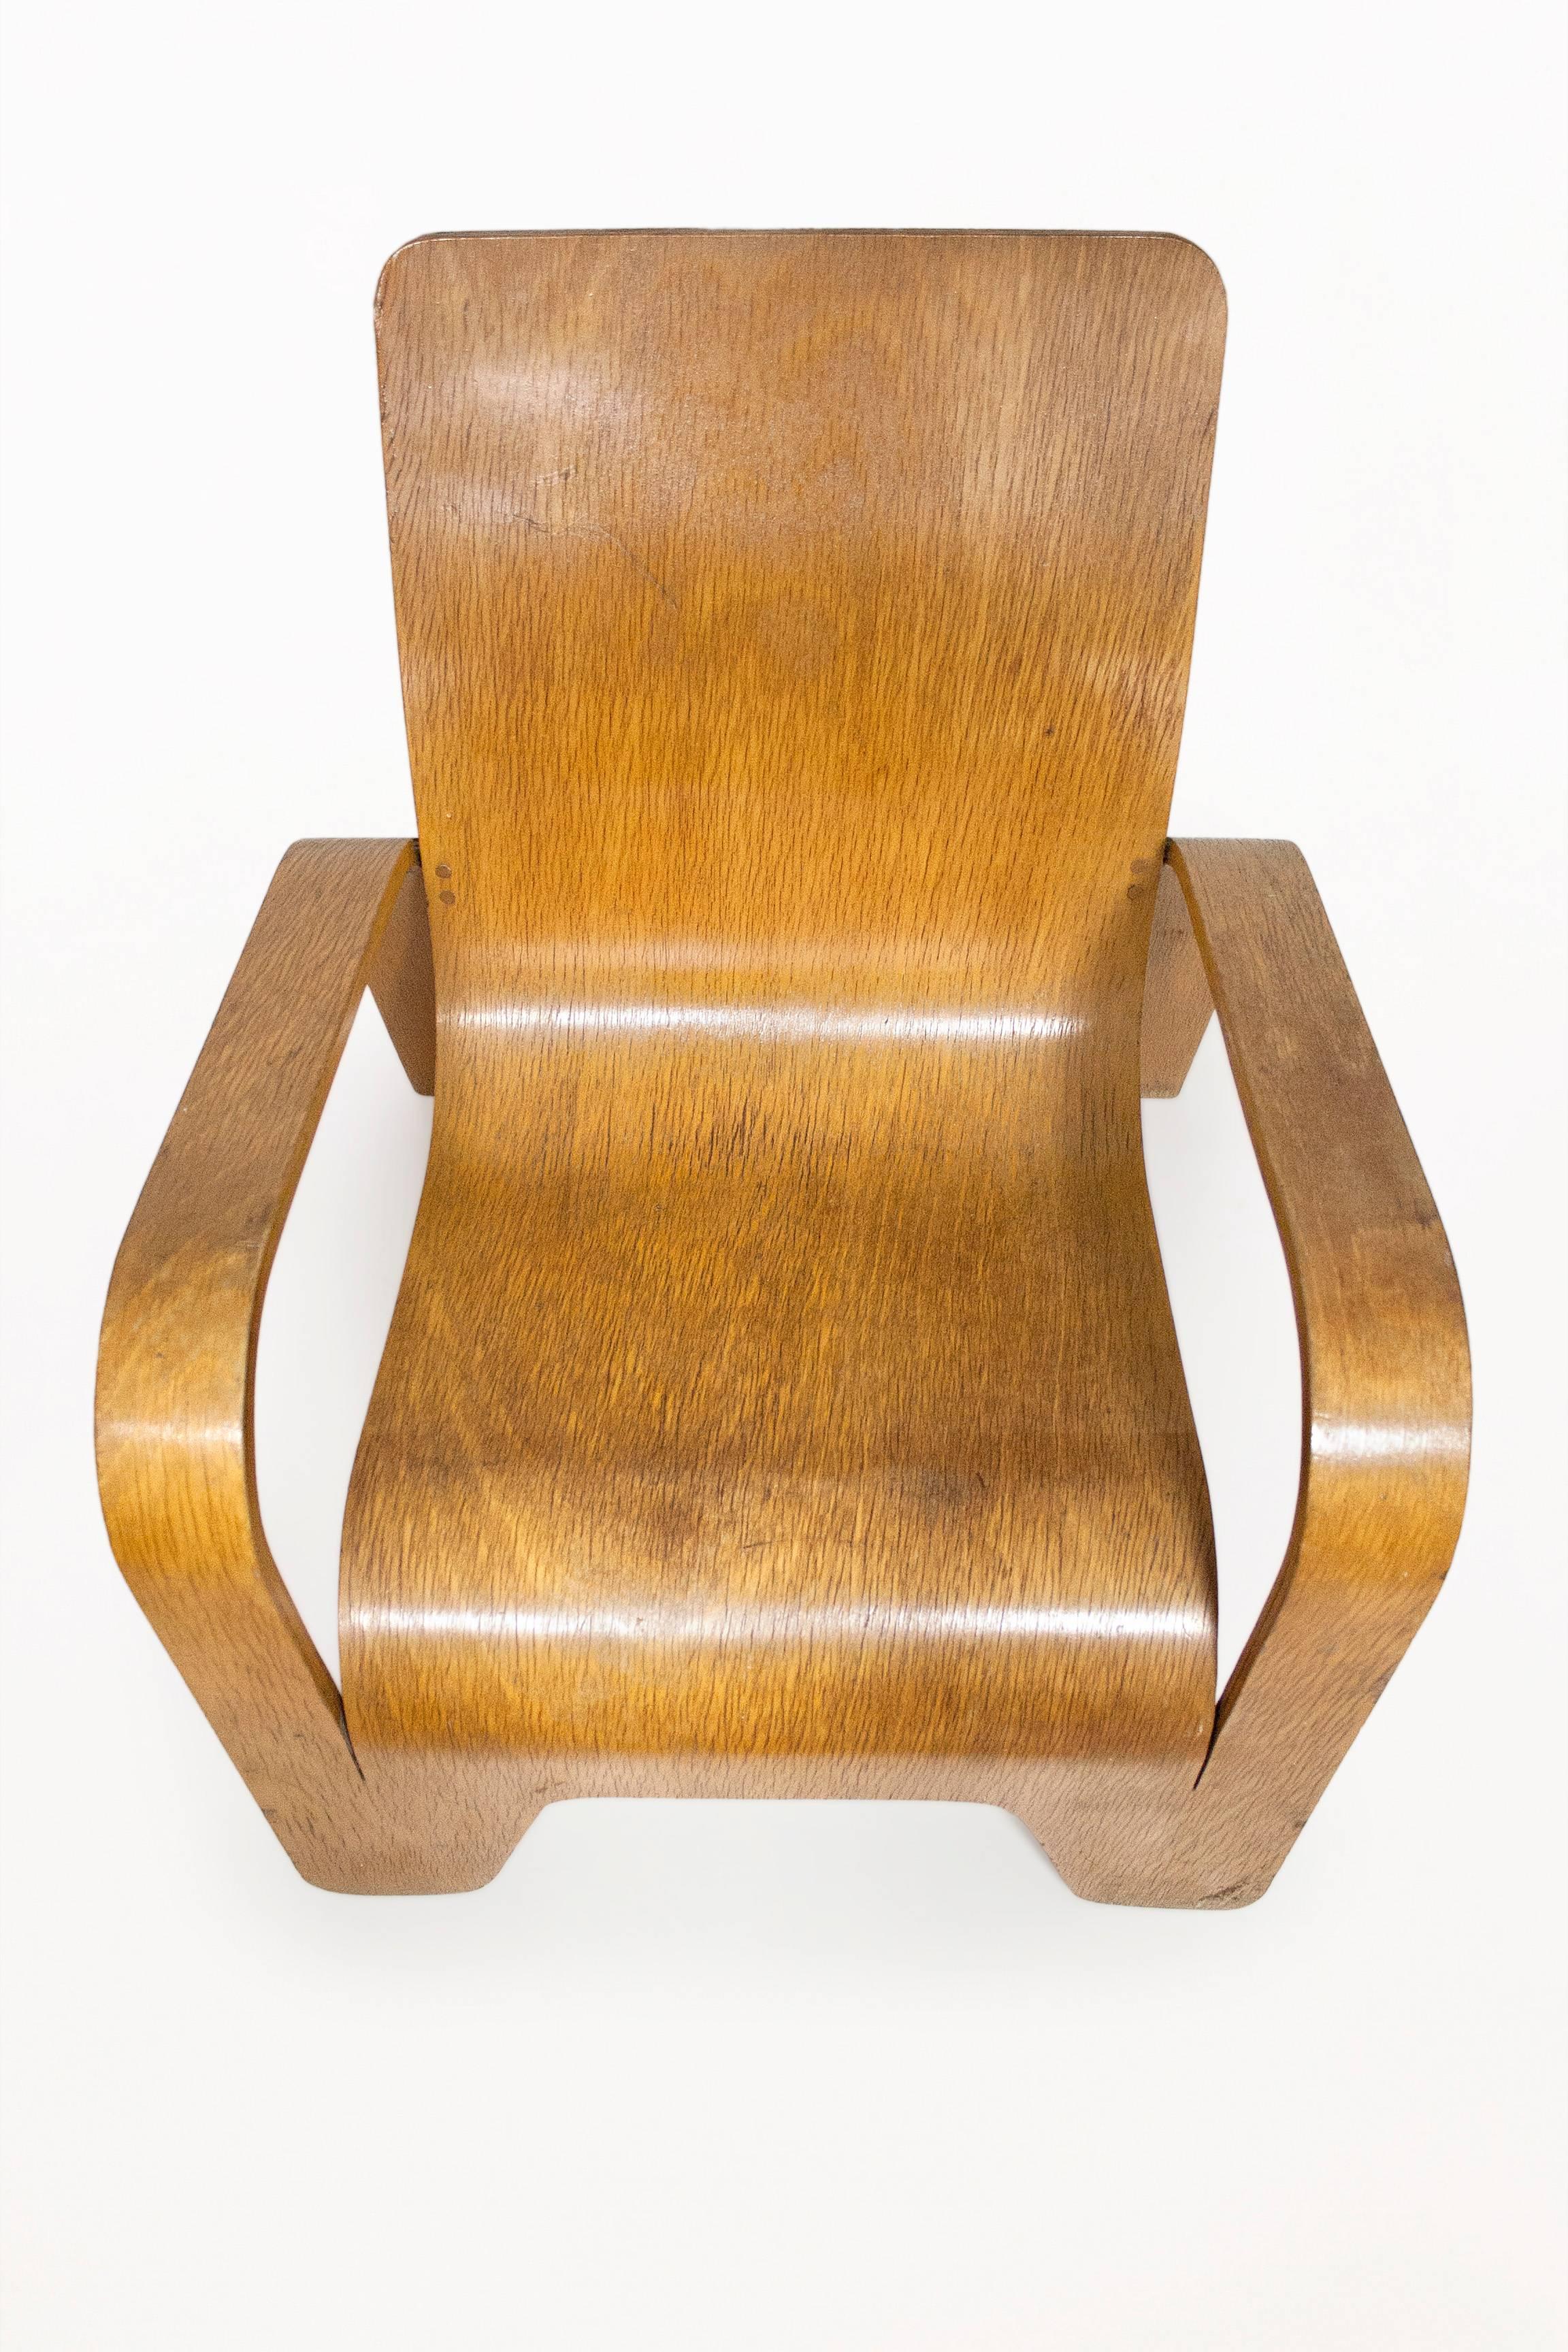 Dutch Lounge Chair by Han Pieck for Lawo Ommen, circa 1940, Netherlands